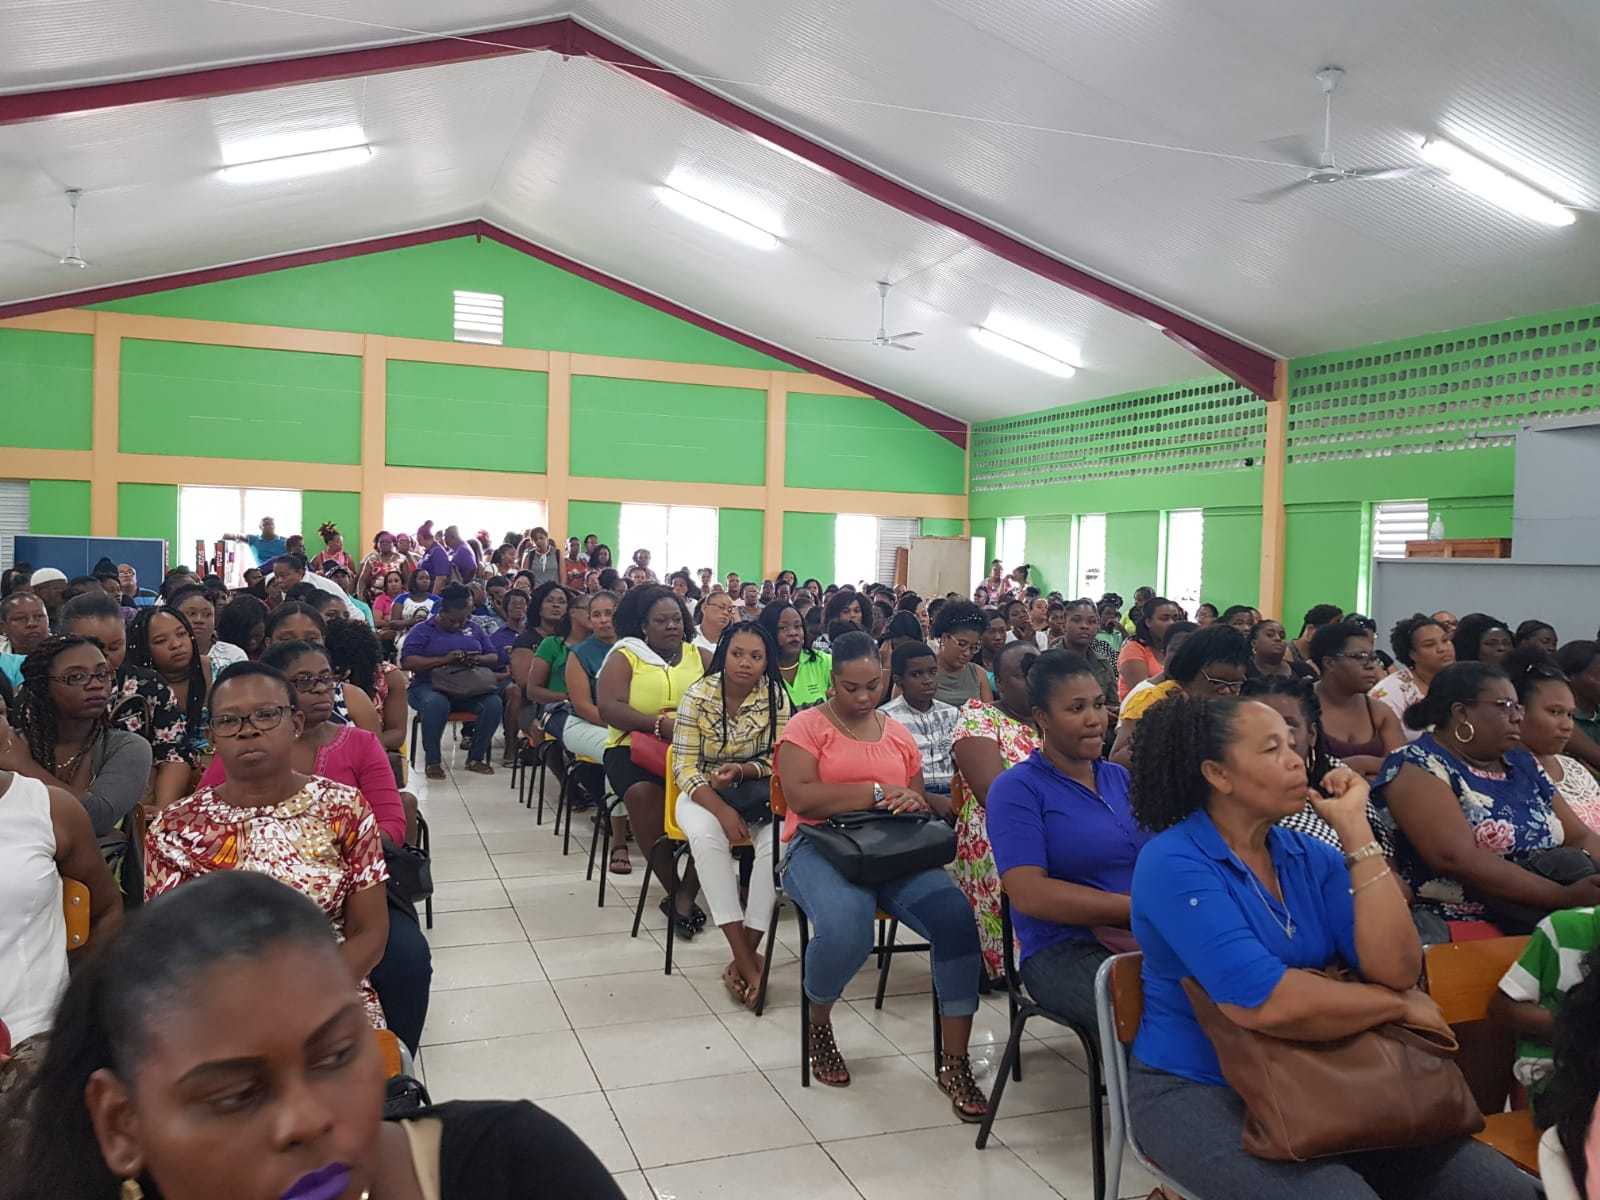  The Dominica Association of Teachers Held A General Meeting To Discuss Key Issues and A Way Forward For The Union